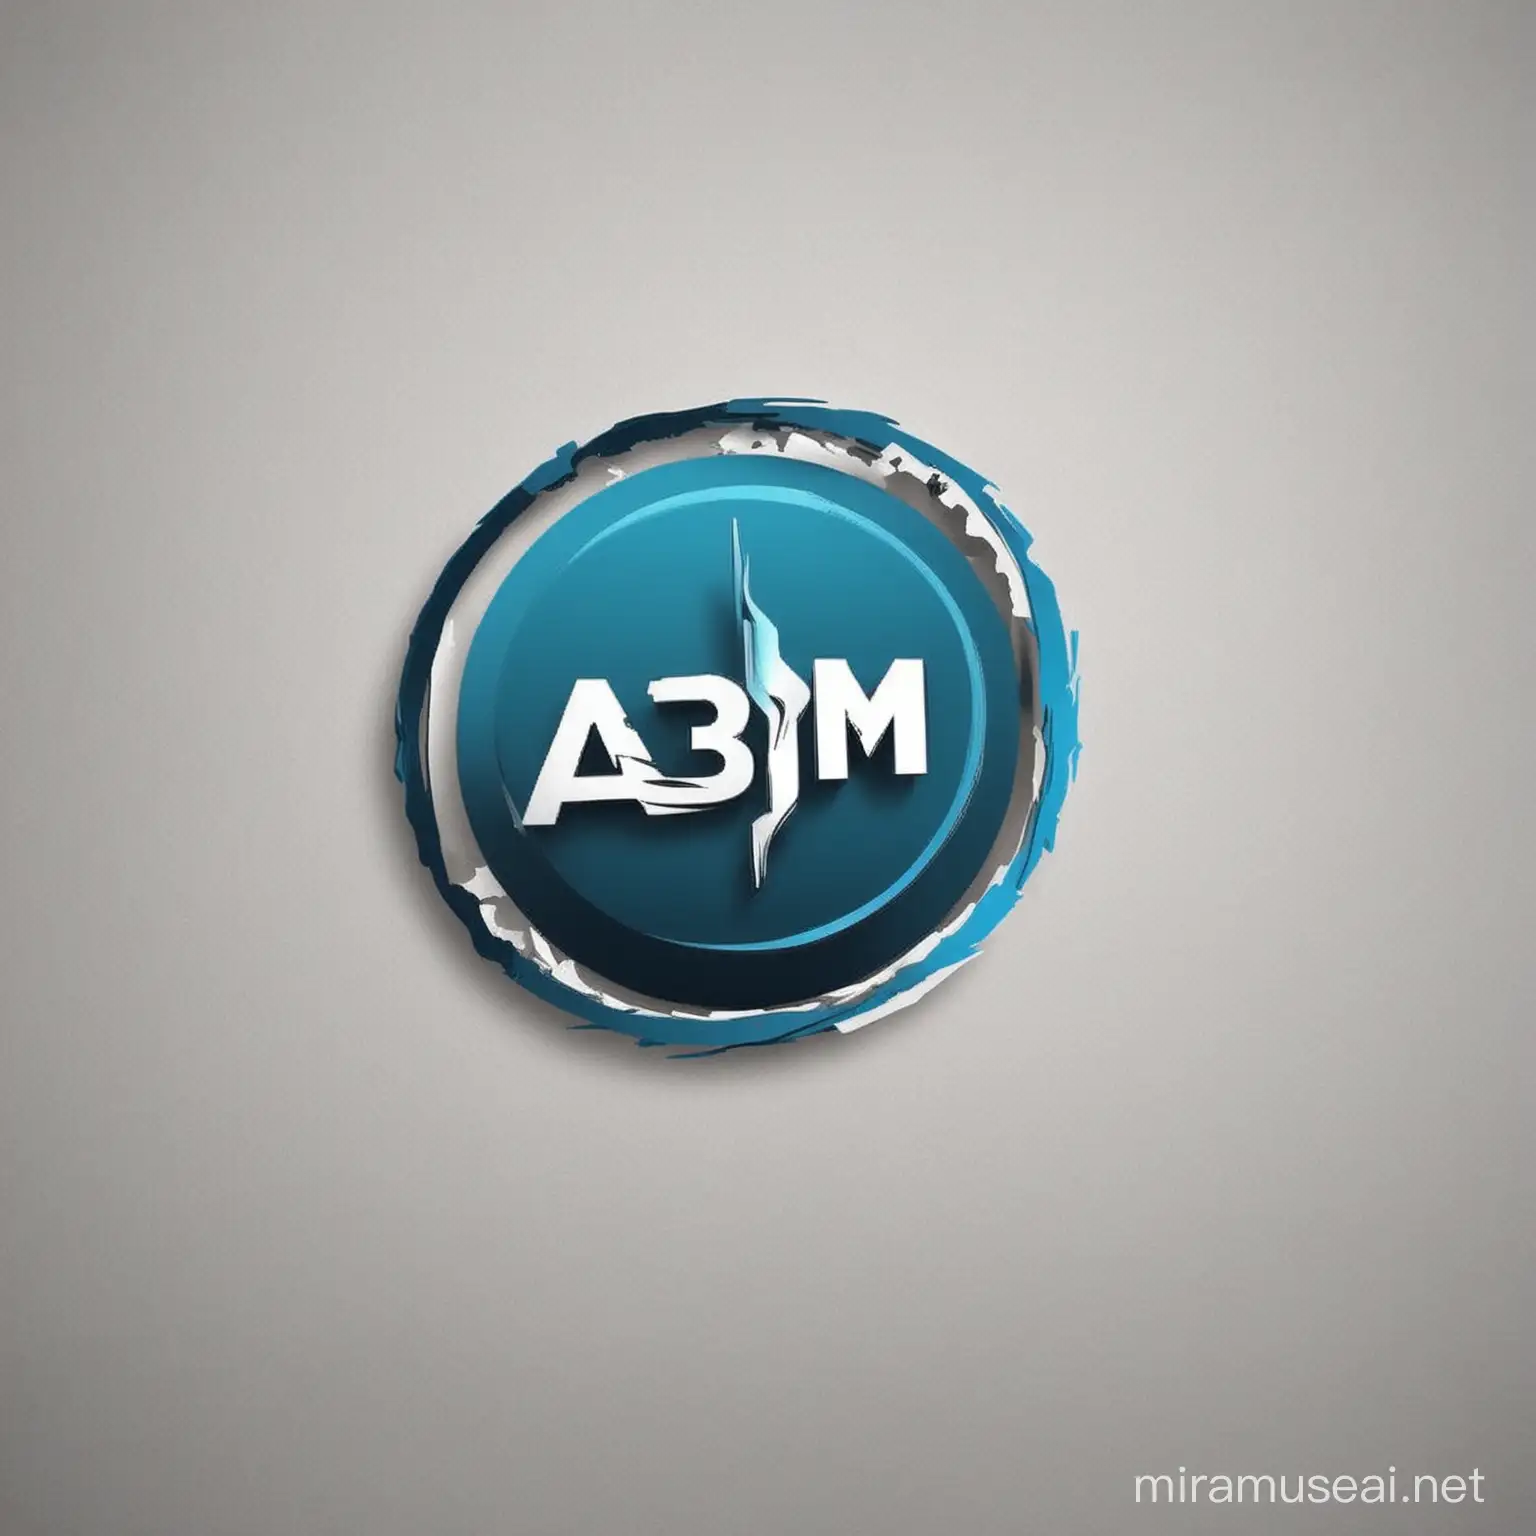 need an logo to my project which named as ABM SERVICES
